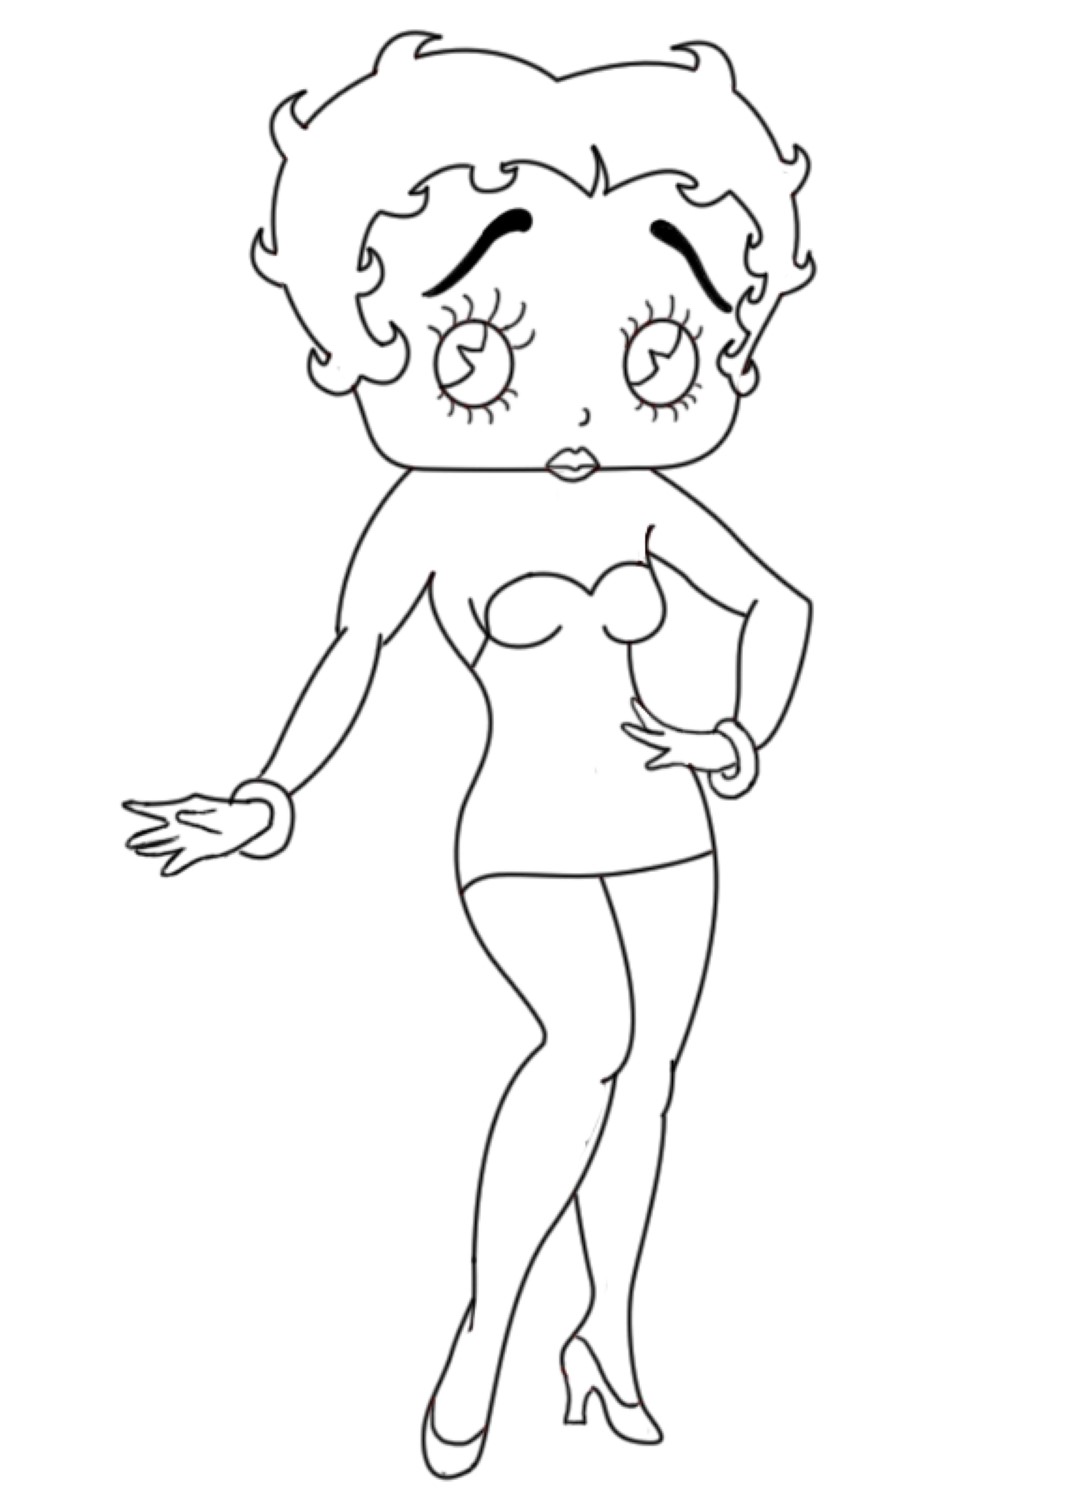 Betty Boop Coloring Sheets.